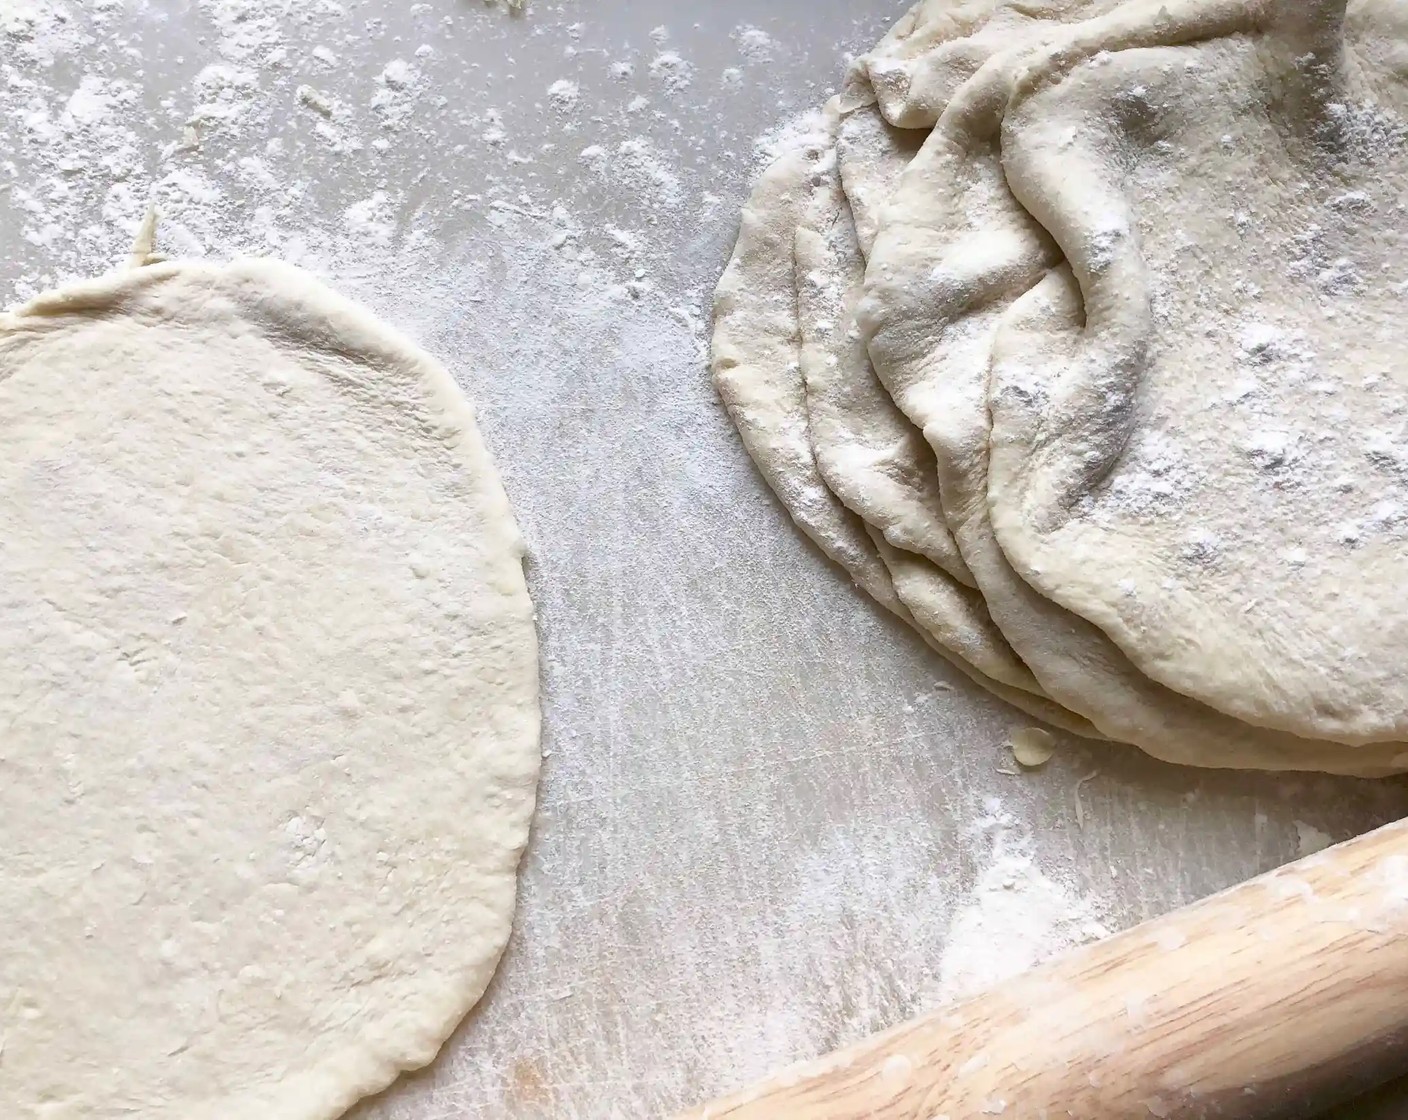 step 7 On a lightly floured surface, roll each one into a large oval about 8-inches in length and 1/4-inches thick. As you form the ovals and stack them in a pile, be sure to sprinkle them with flour to prevent sticking.